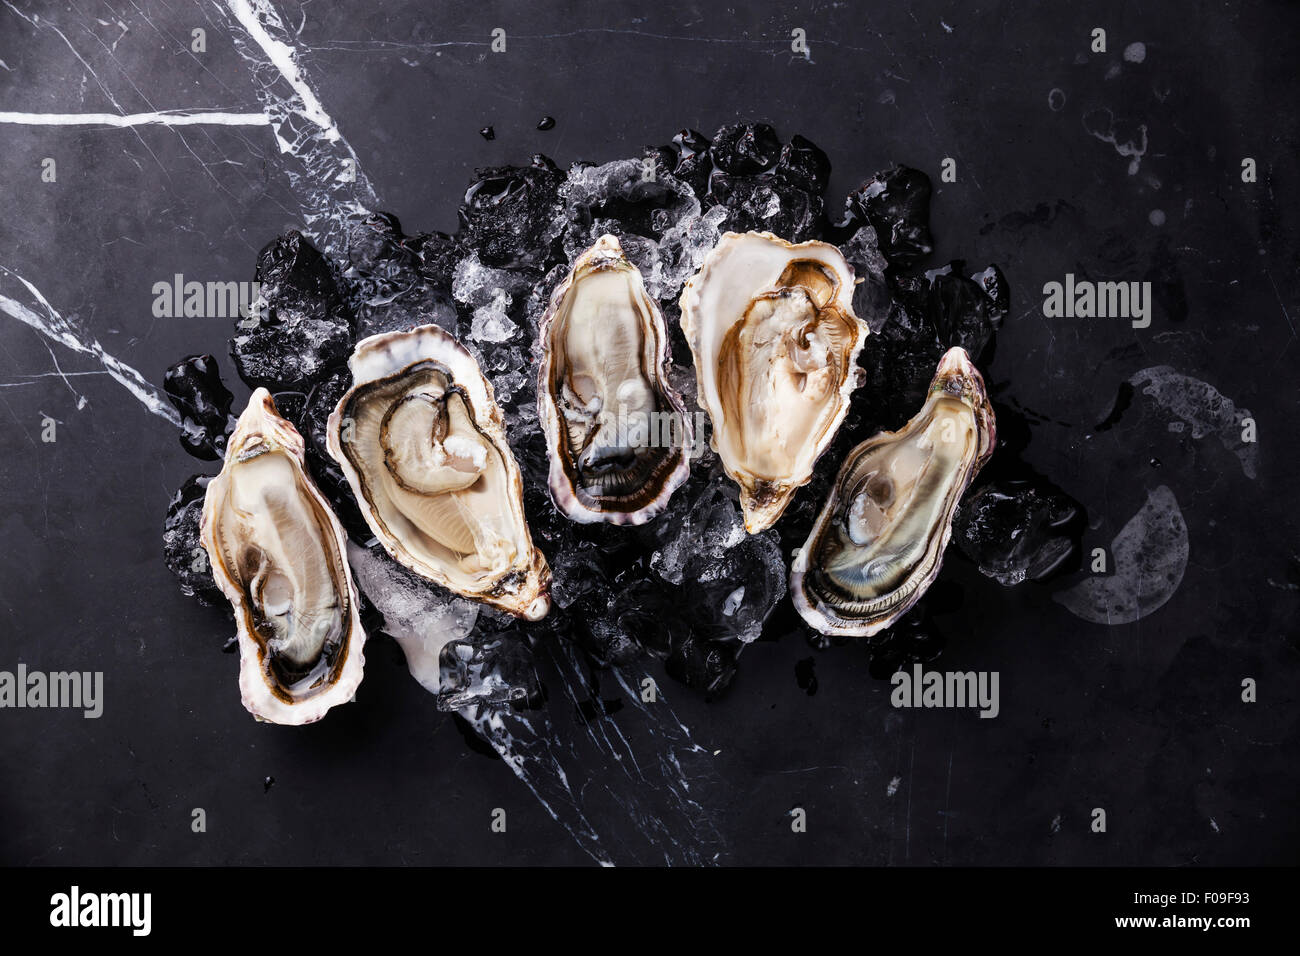 Opened Oysters on dark marble background with ice Stock Photo